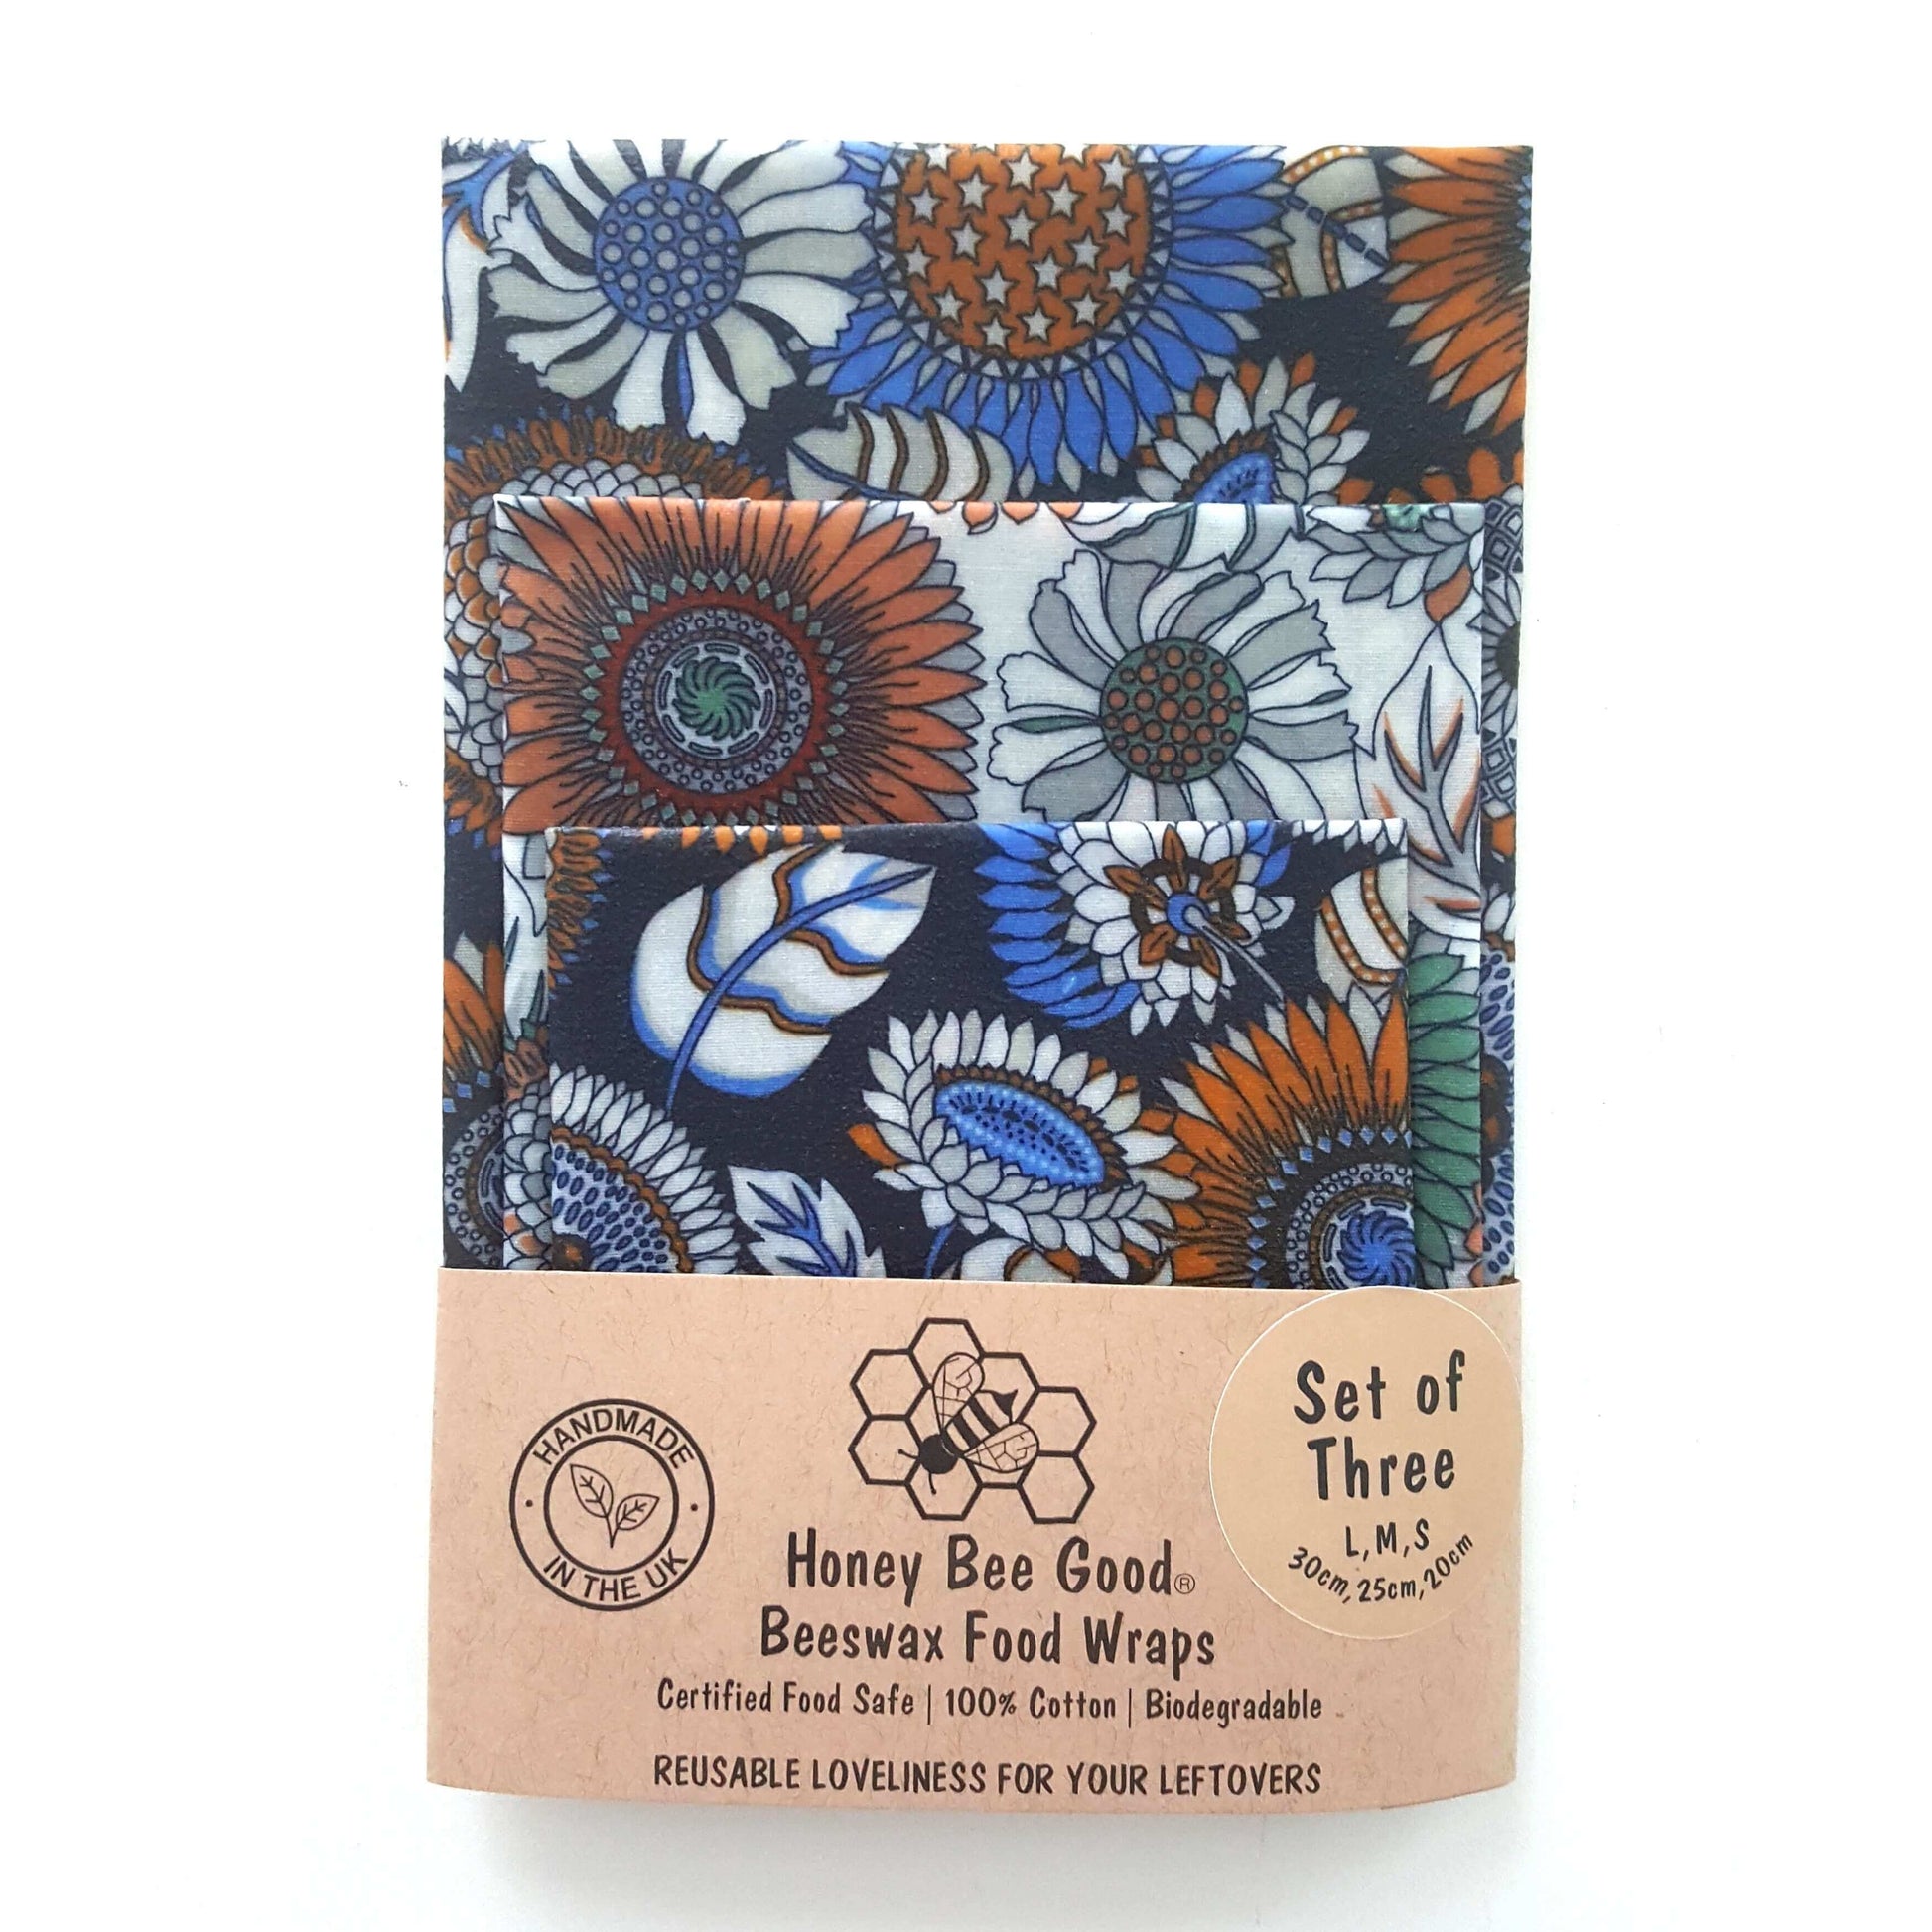 Reusable Beeswax Food Wraps 100% Hand Made in the UK by Honey Bee Good shown in Set of 3 Sunflowers pattern